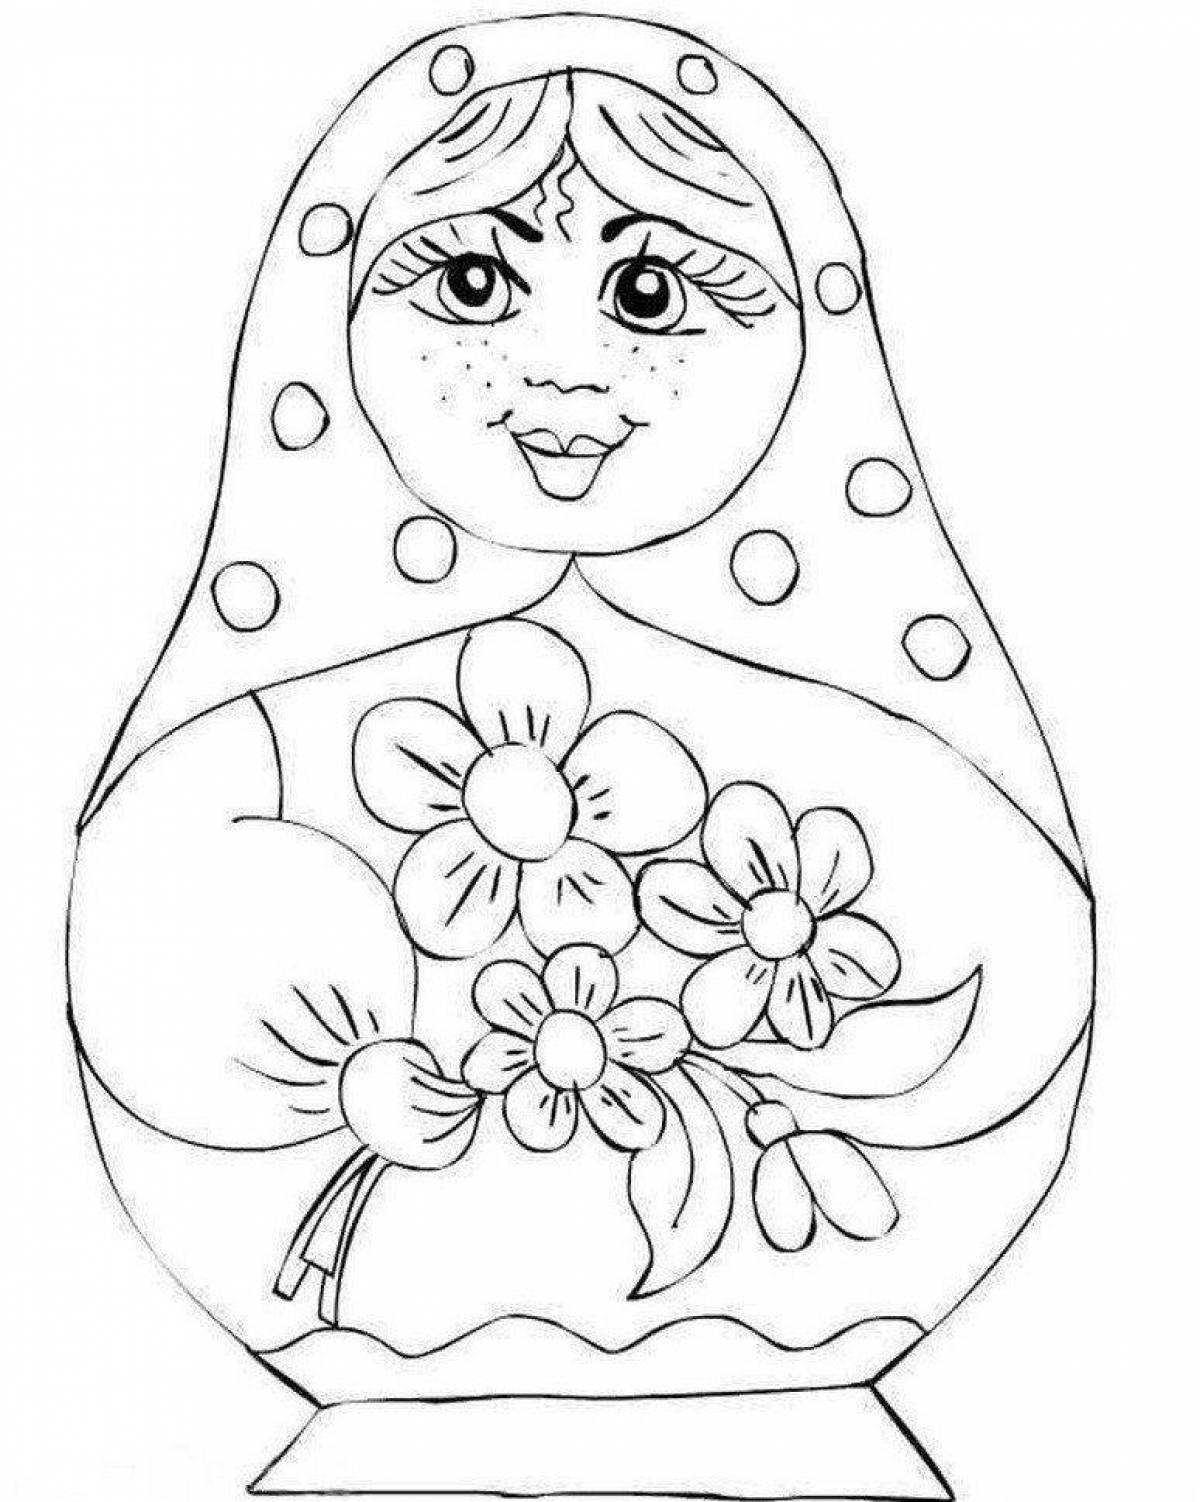 Attractive matryoshka coloring book for toddlers